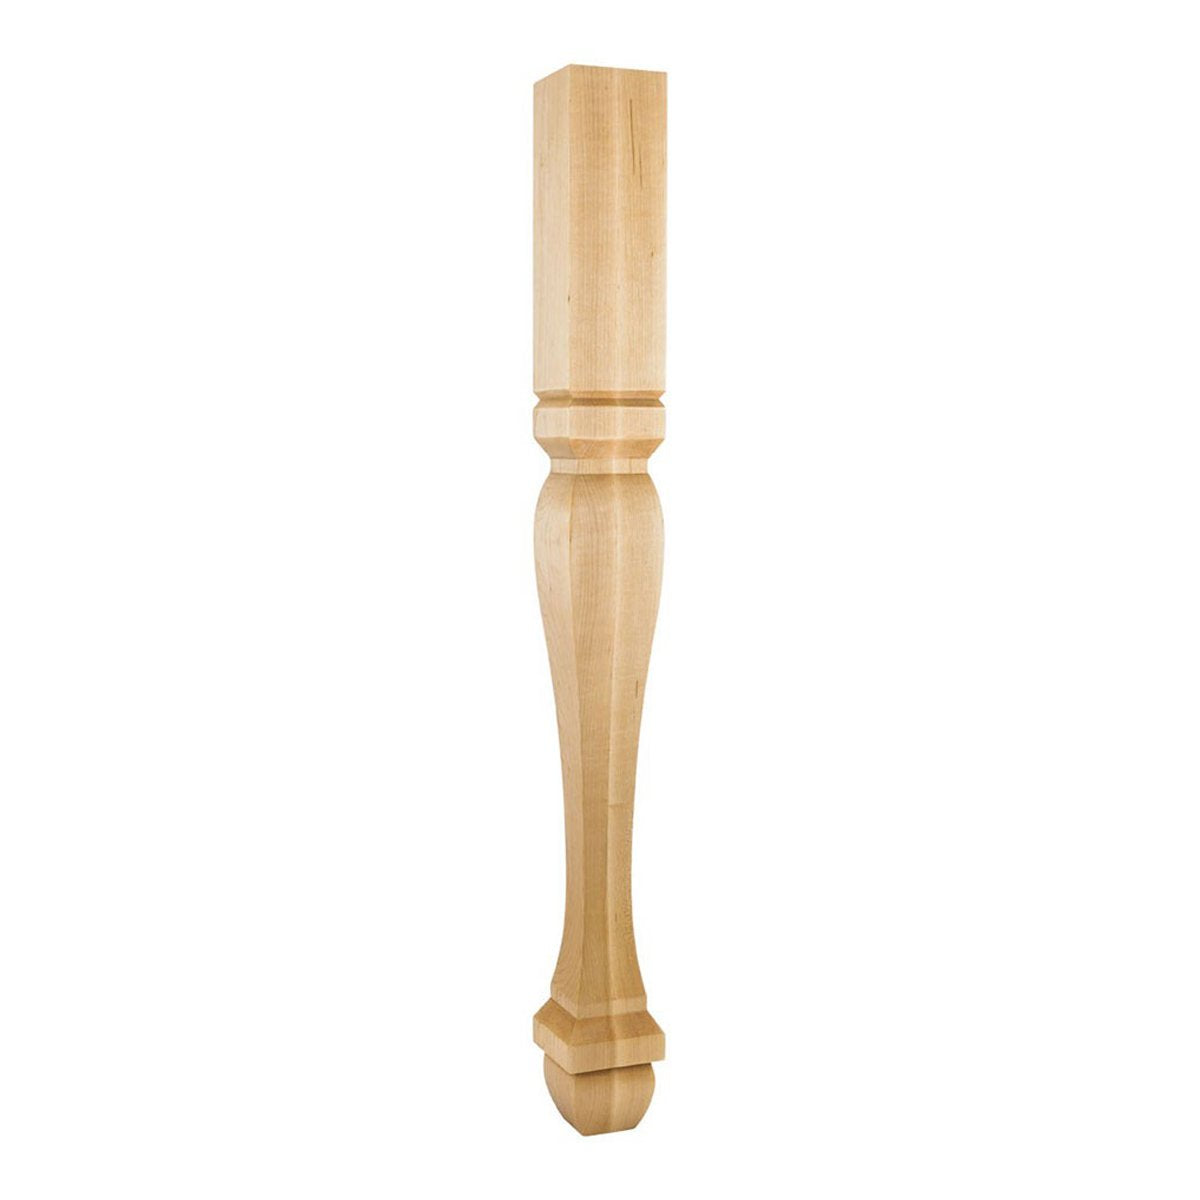 Hardware Resources 3-1/2" x 3-1/2" x 35-1/2" Square White Birch Post / Table Leg with Foot-DirectSinks